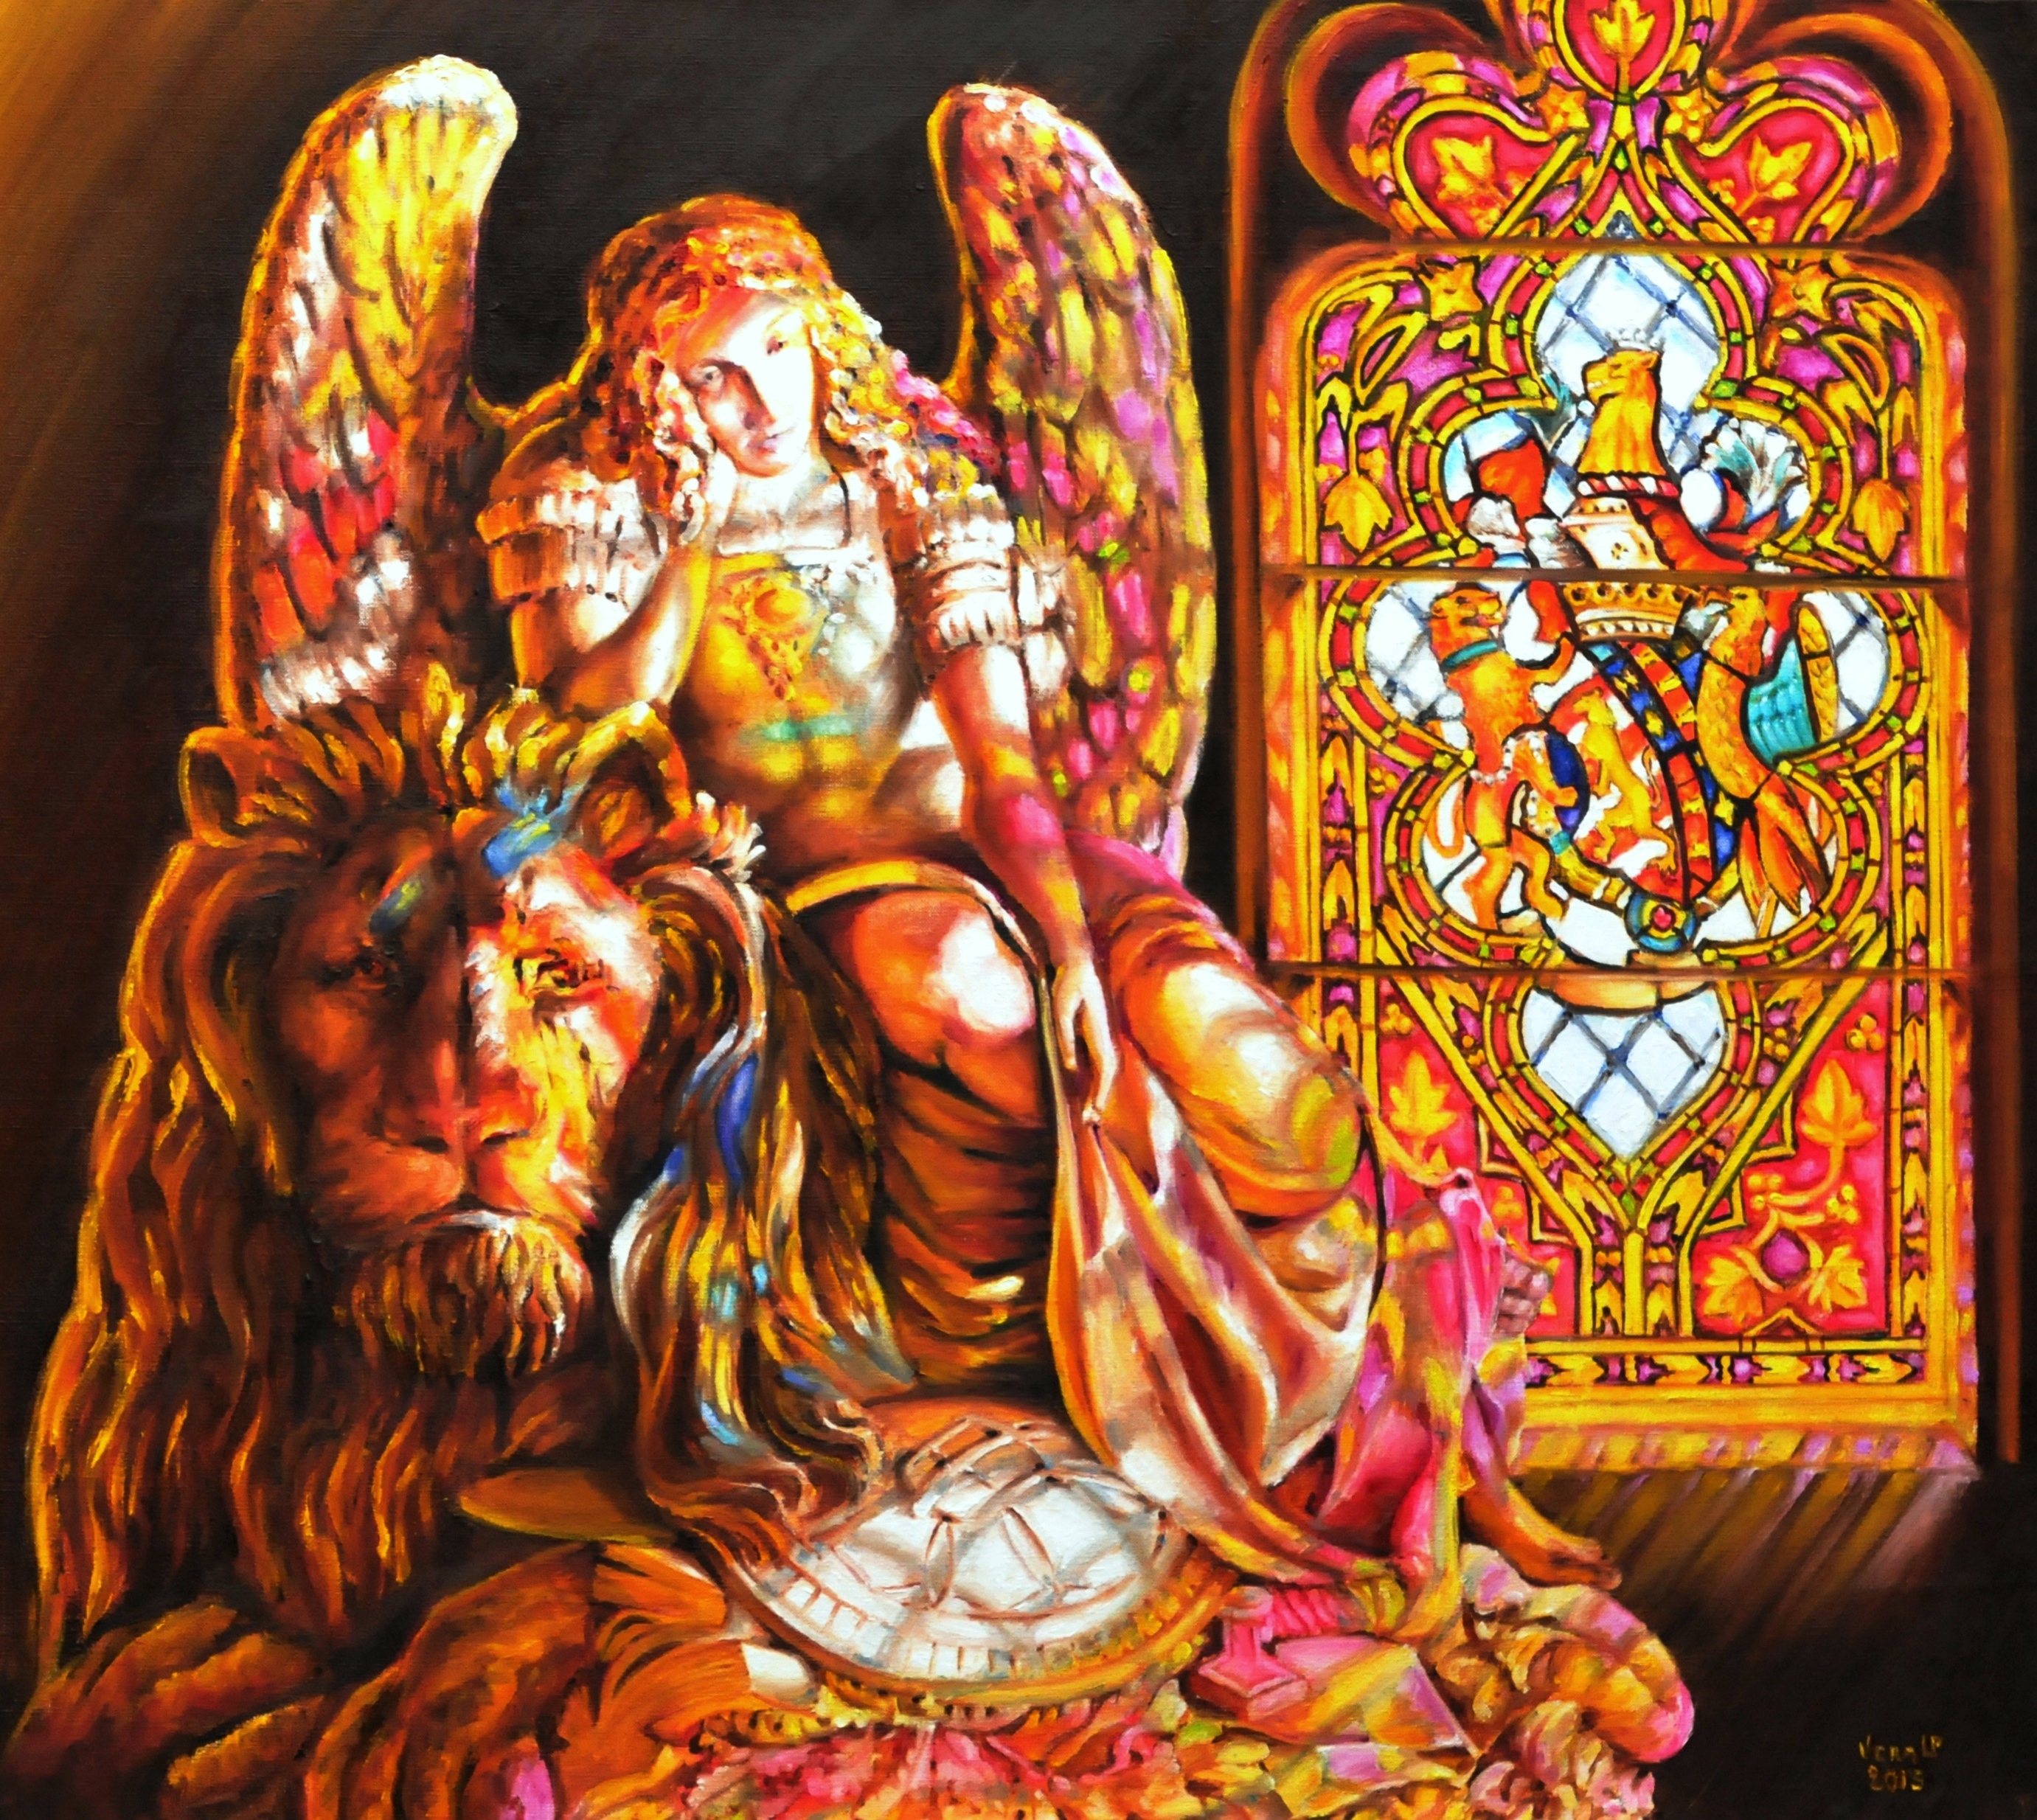 Dreaming angel sculpture and stained glass | Oil paint on linen | Year: 2013 | Dimensions: 80x90cm